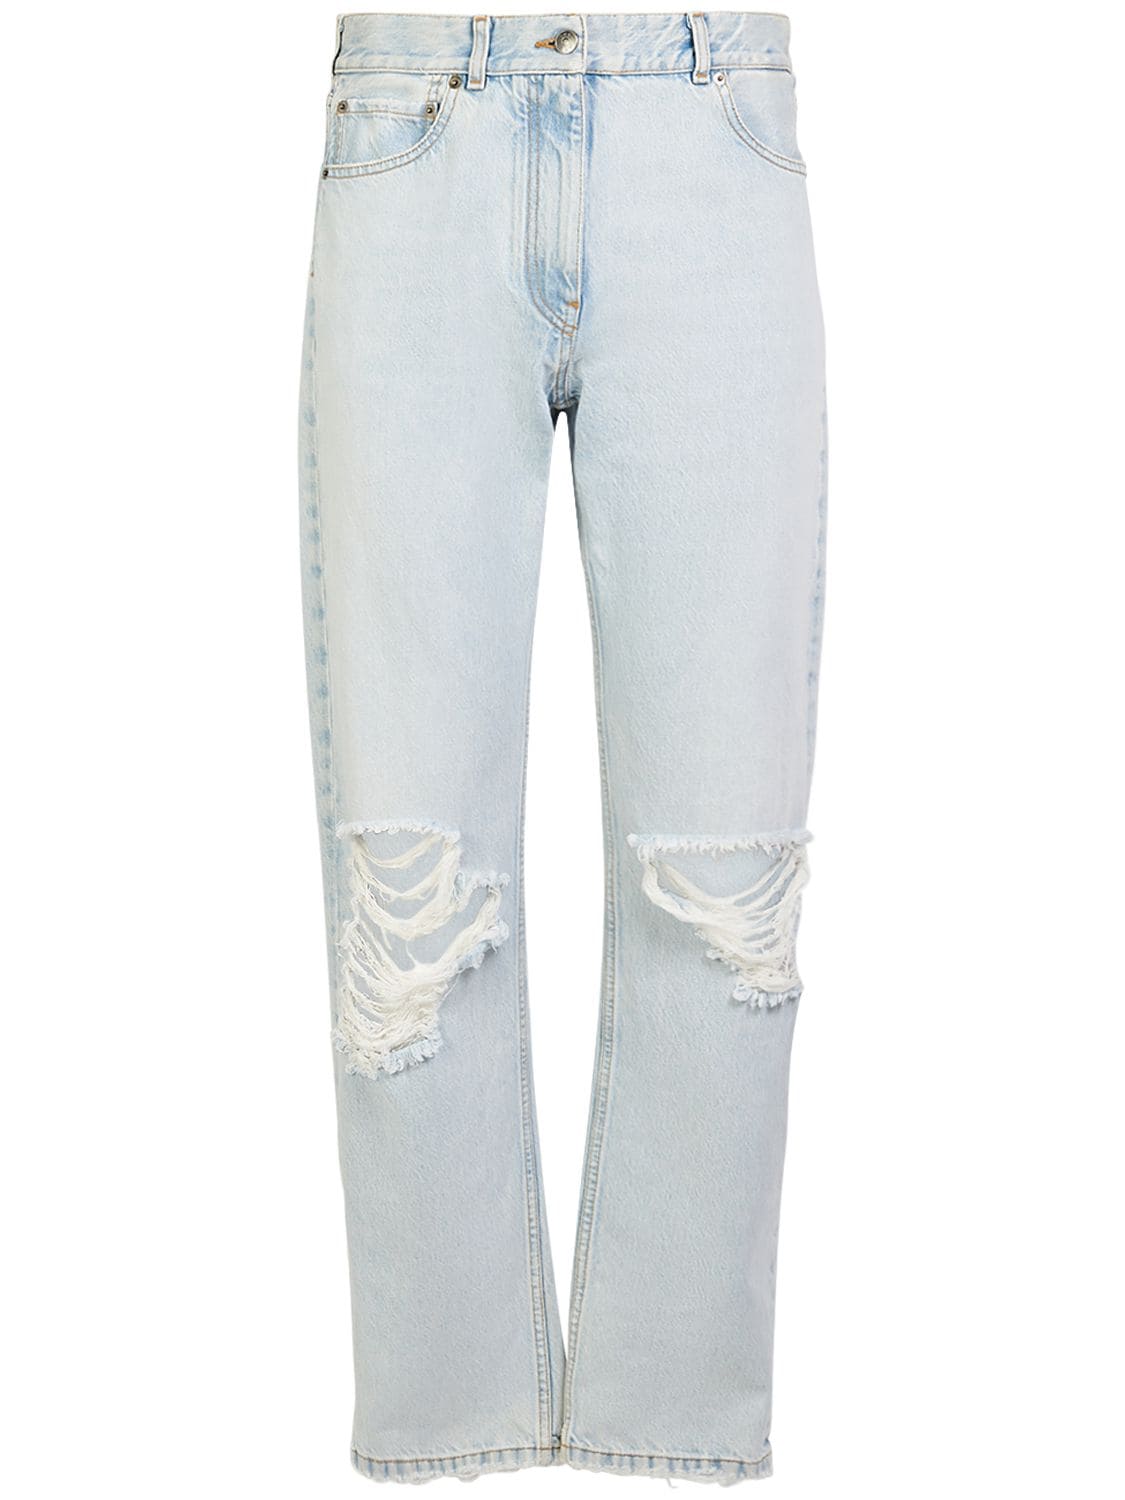 Image of Burted Jean Distressed Jeans